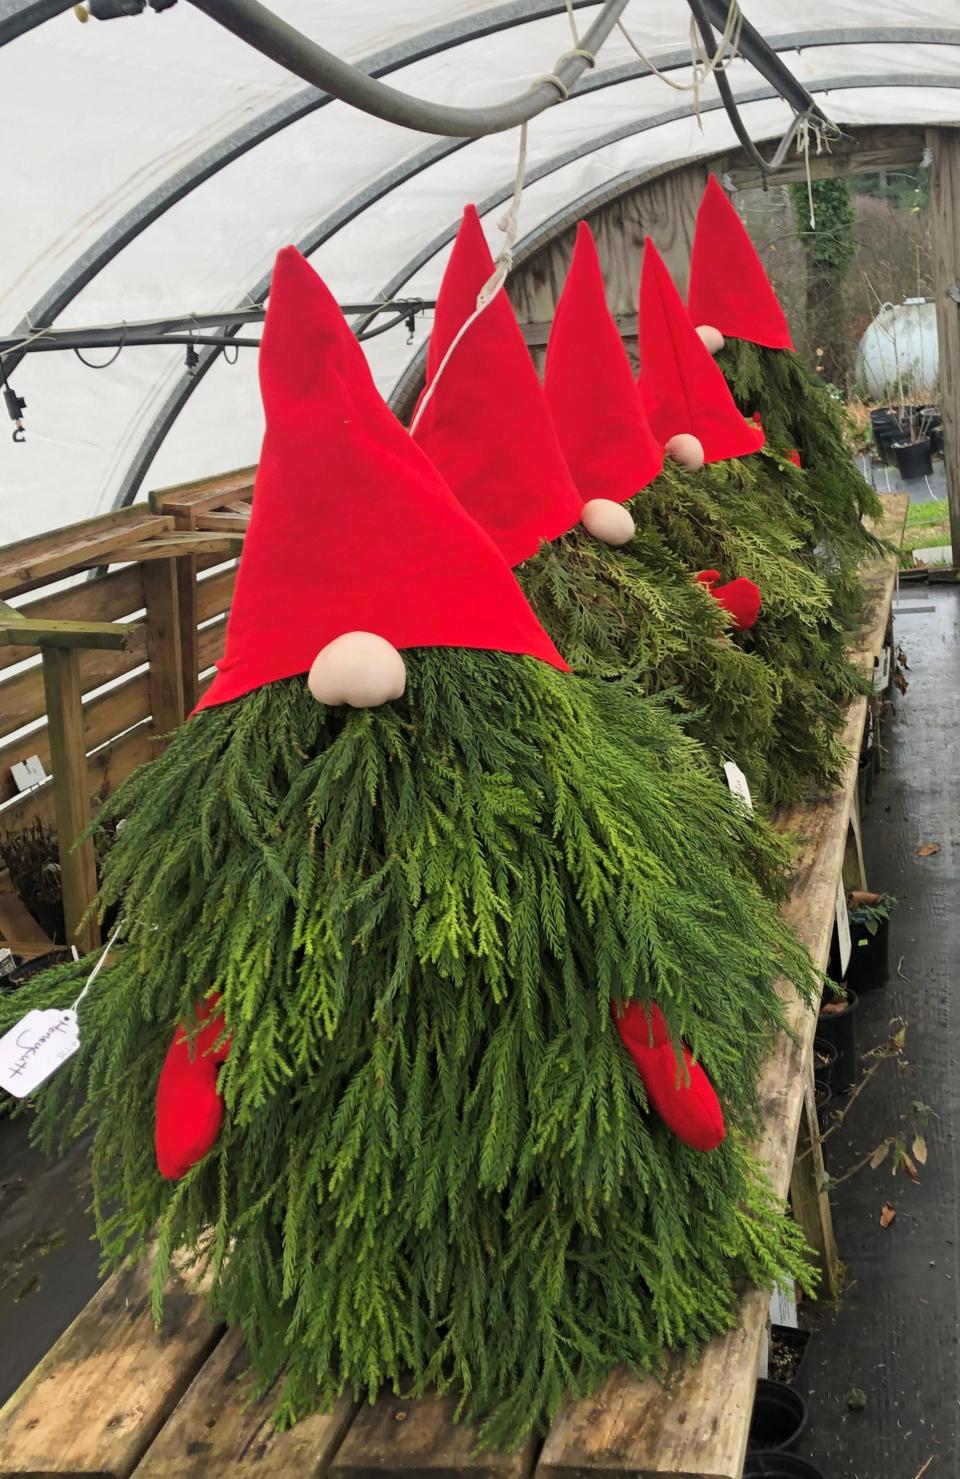 Bullington Gardens annual Holiday Greenery and Craft Sale is set for Dec. 1-2.